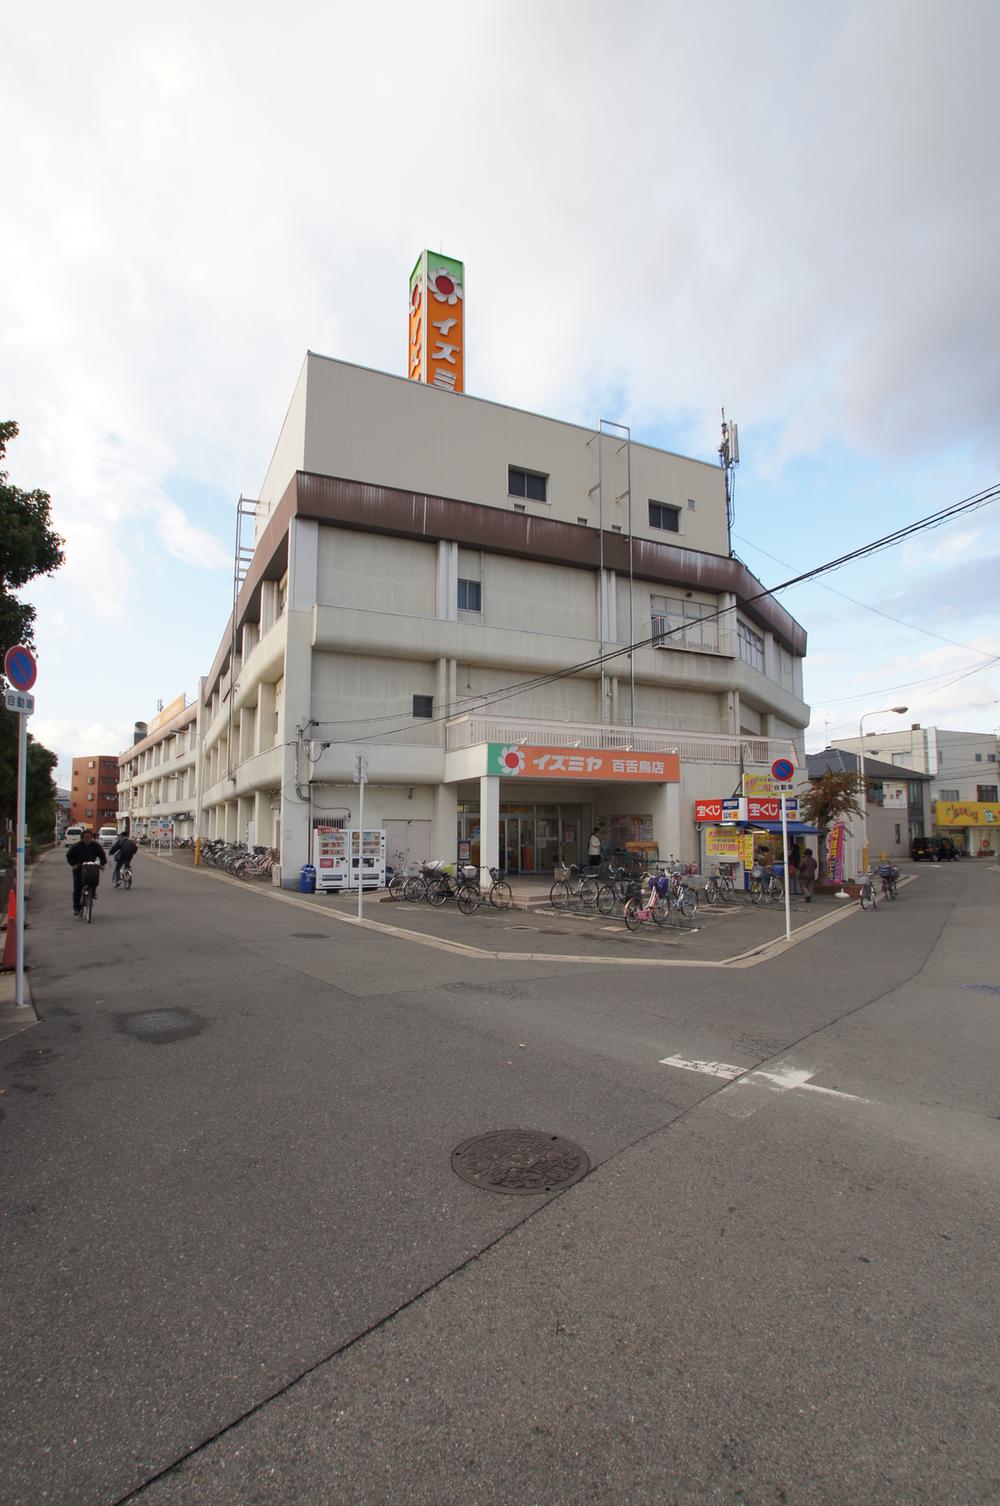 Supermarket. Izumiya up to 560m shopping are also nearby.